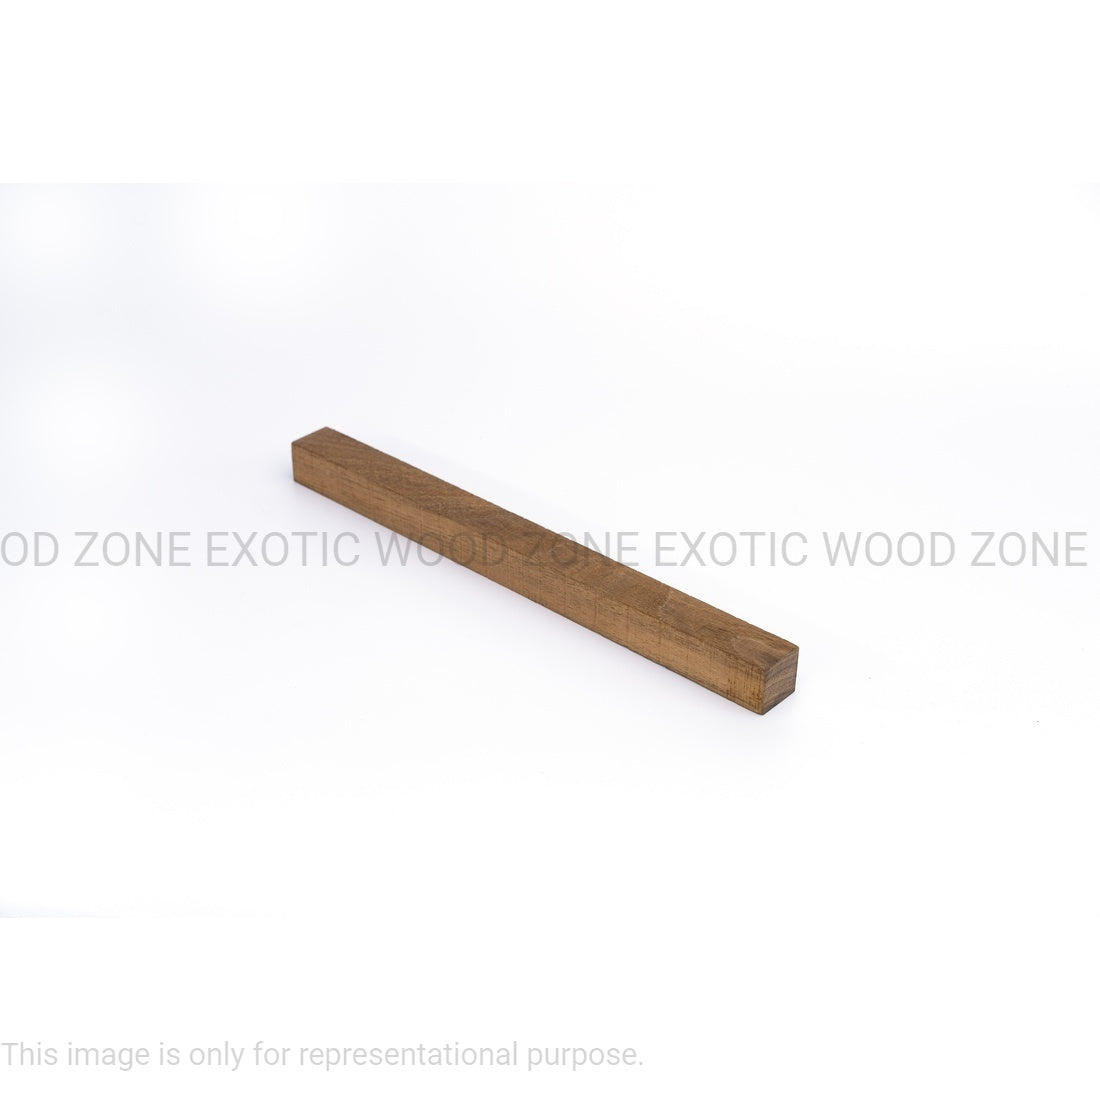 Caribbean Walnut Hobbywood Blank 1&quot; x 1 &quot; x 12&quot; inches Exotic Wood Zone